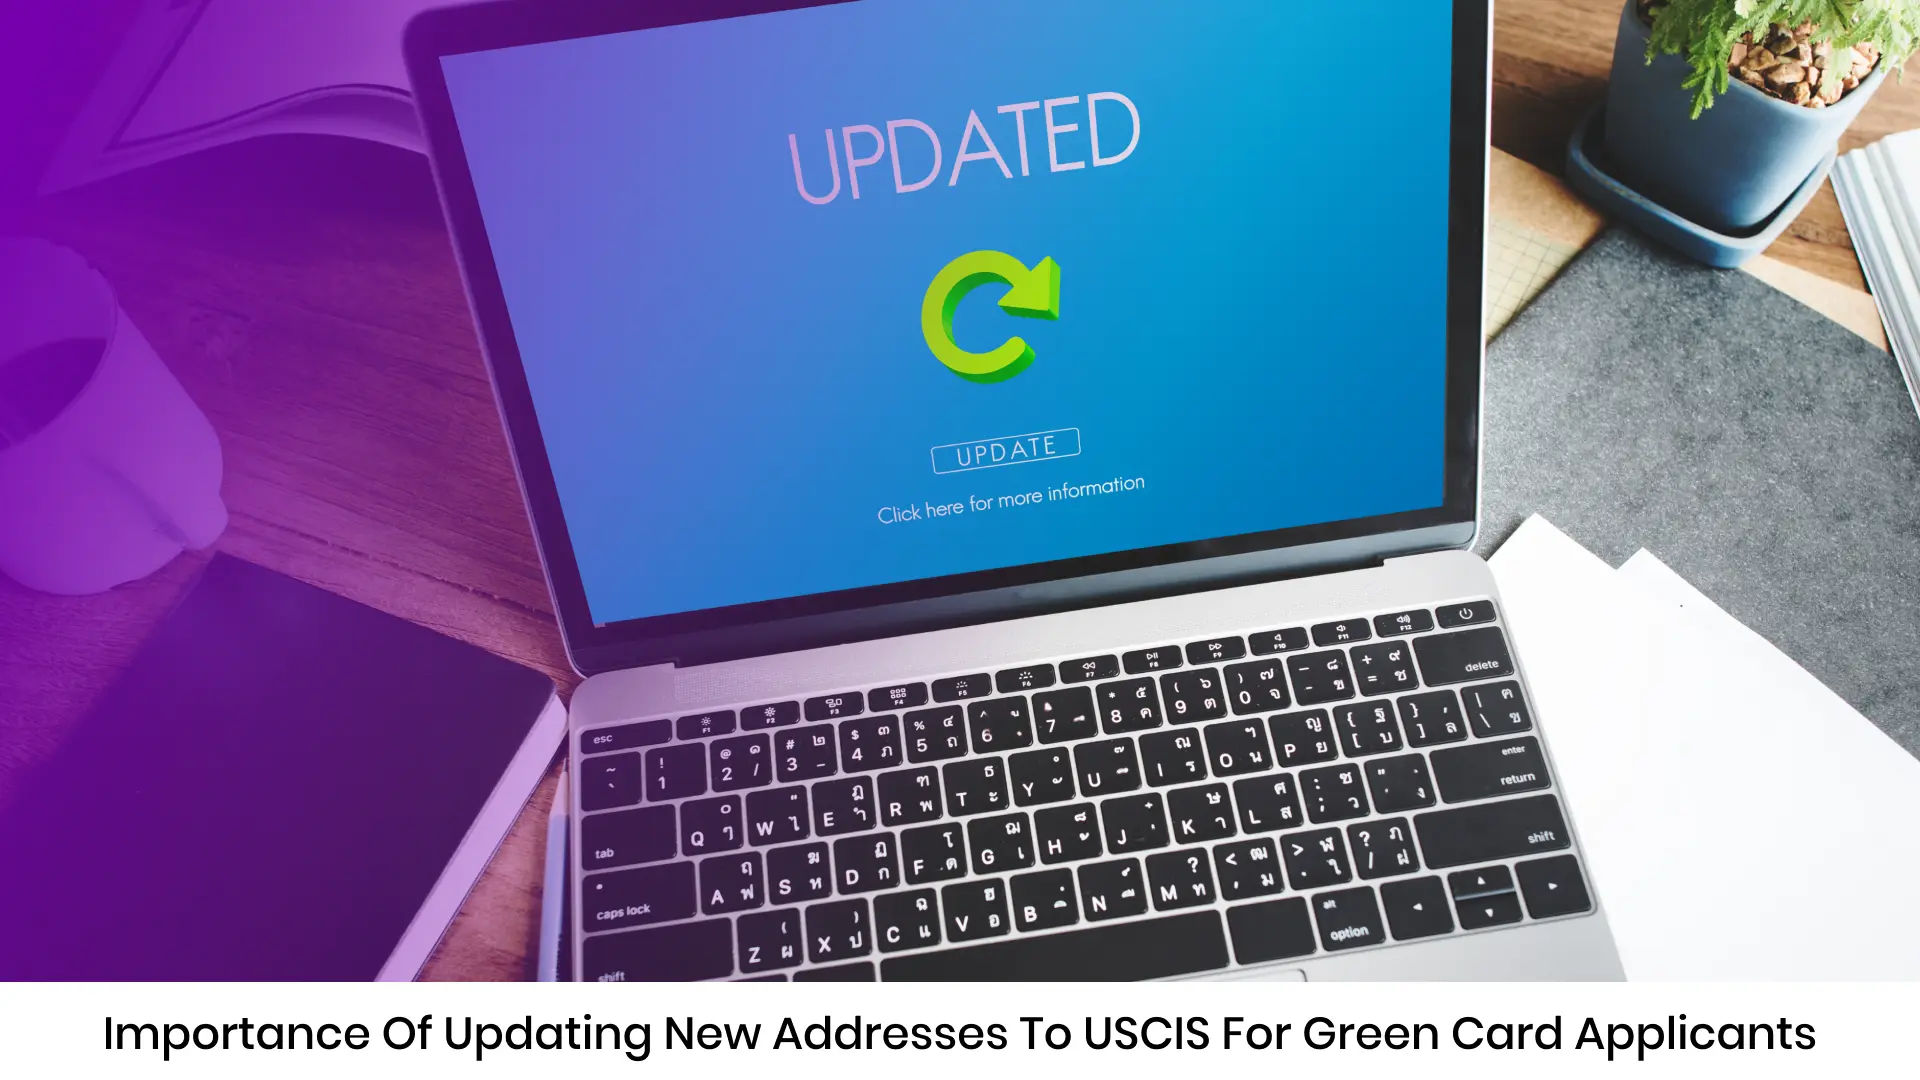 Importance of updating New Addresses to USCIS for Green Card Applicants